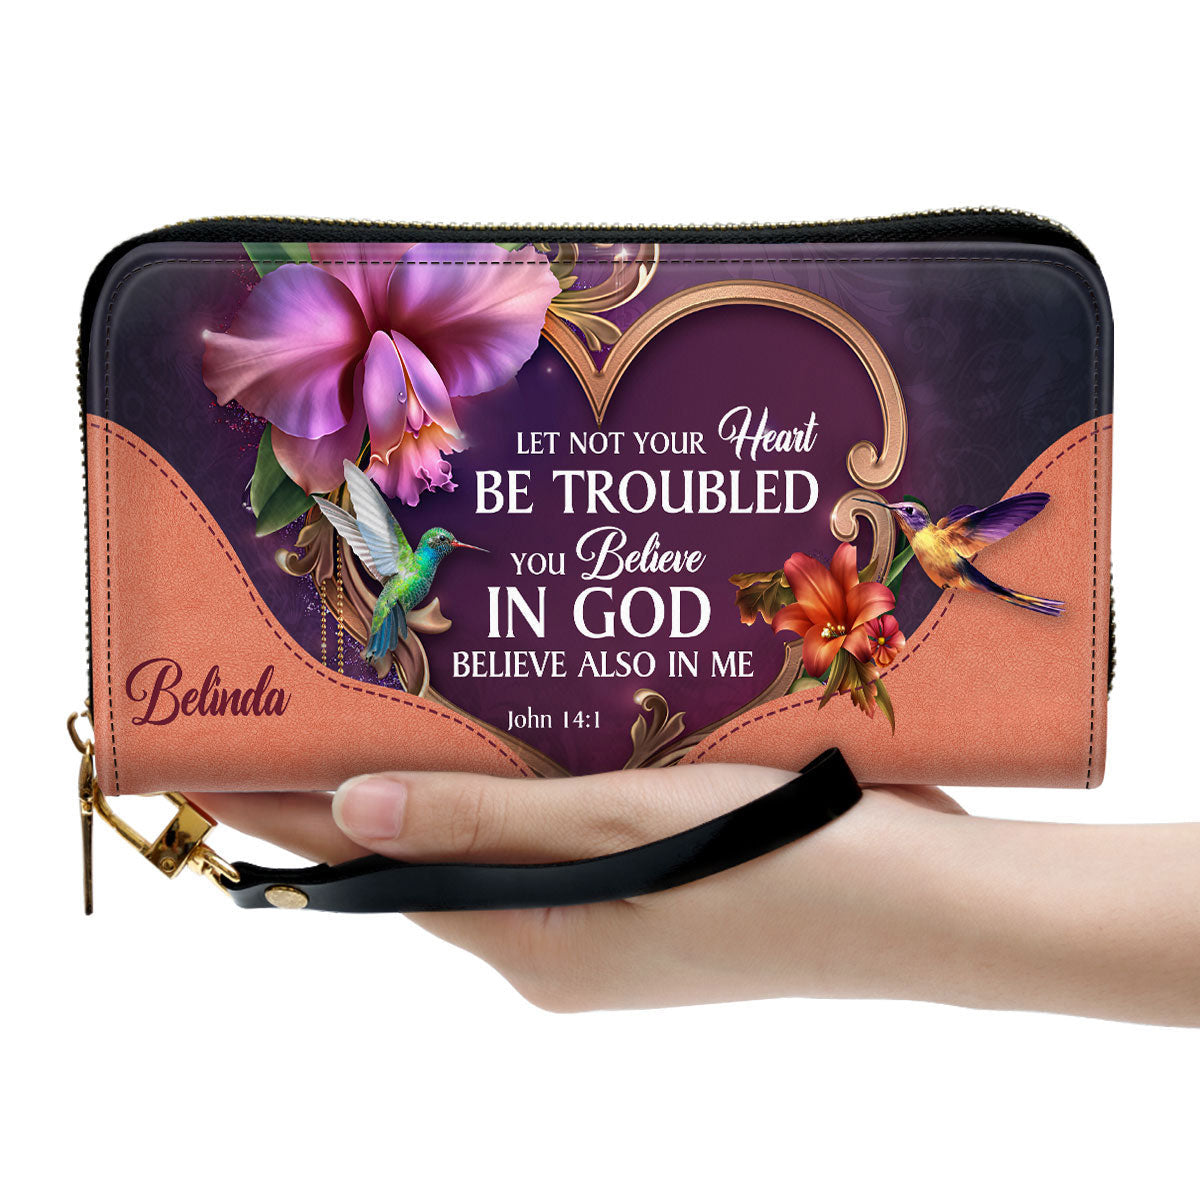 You Believe In God Beautiful Clutch Purse For Women - Personalized Name - Christian Gifts For Women